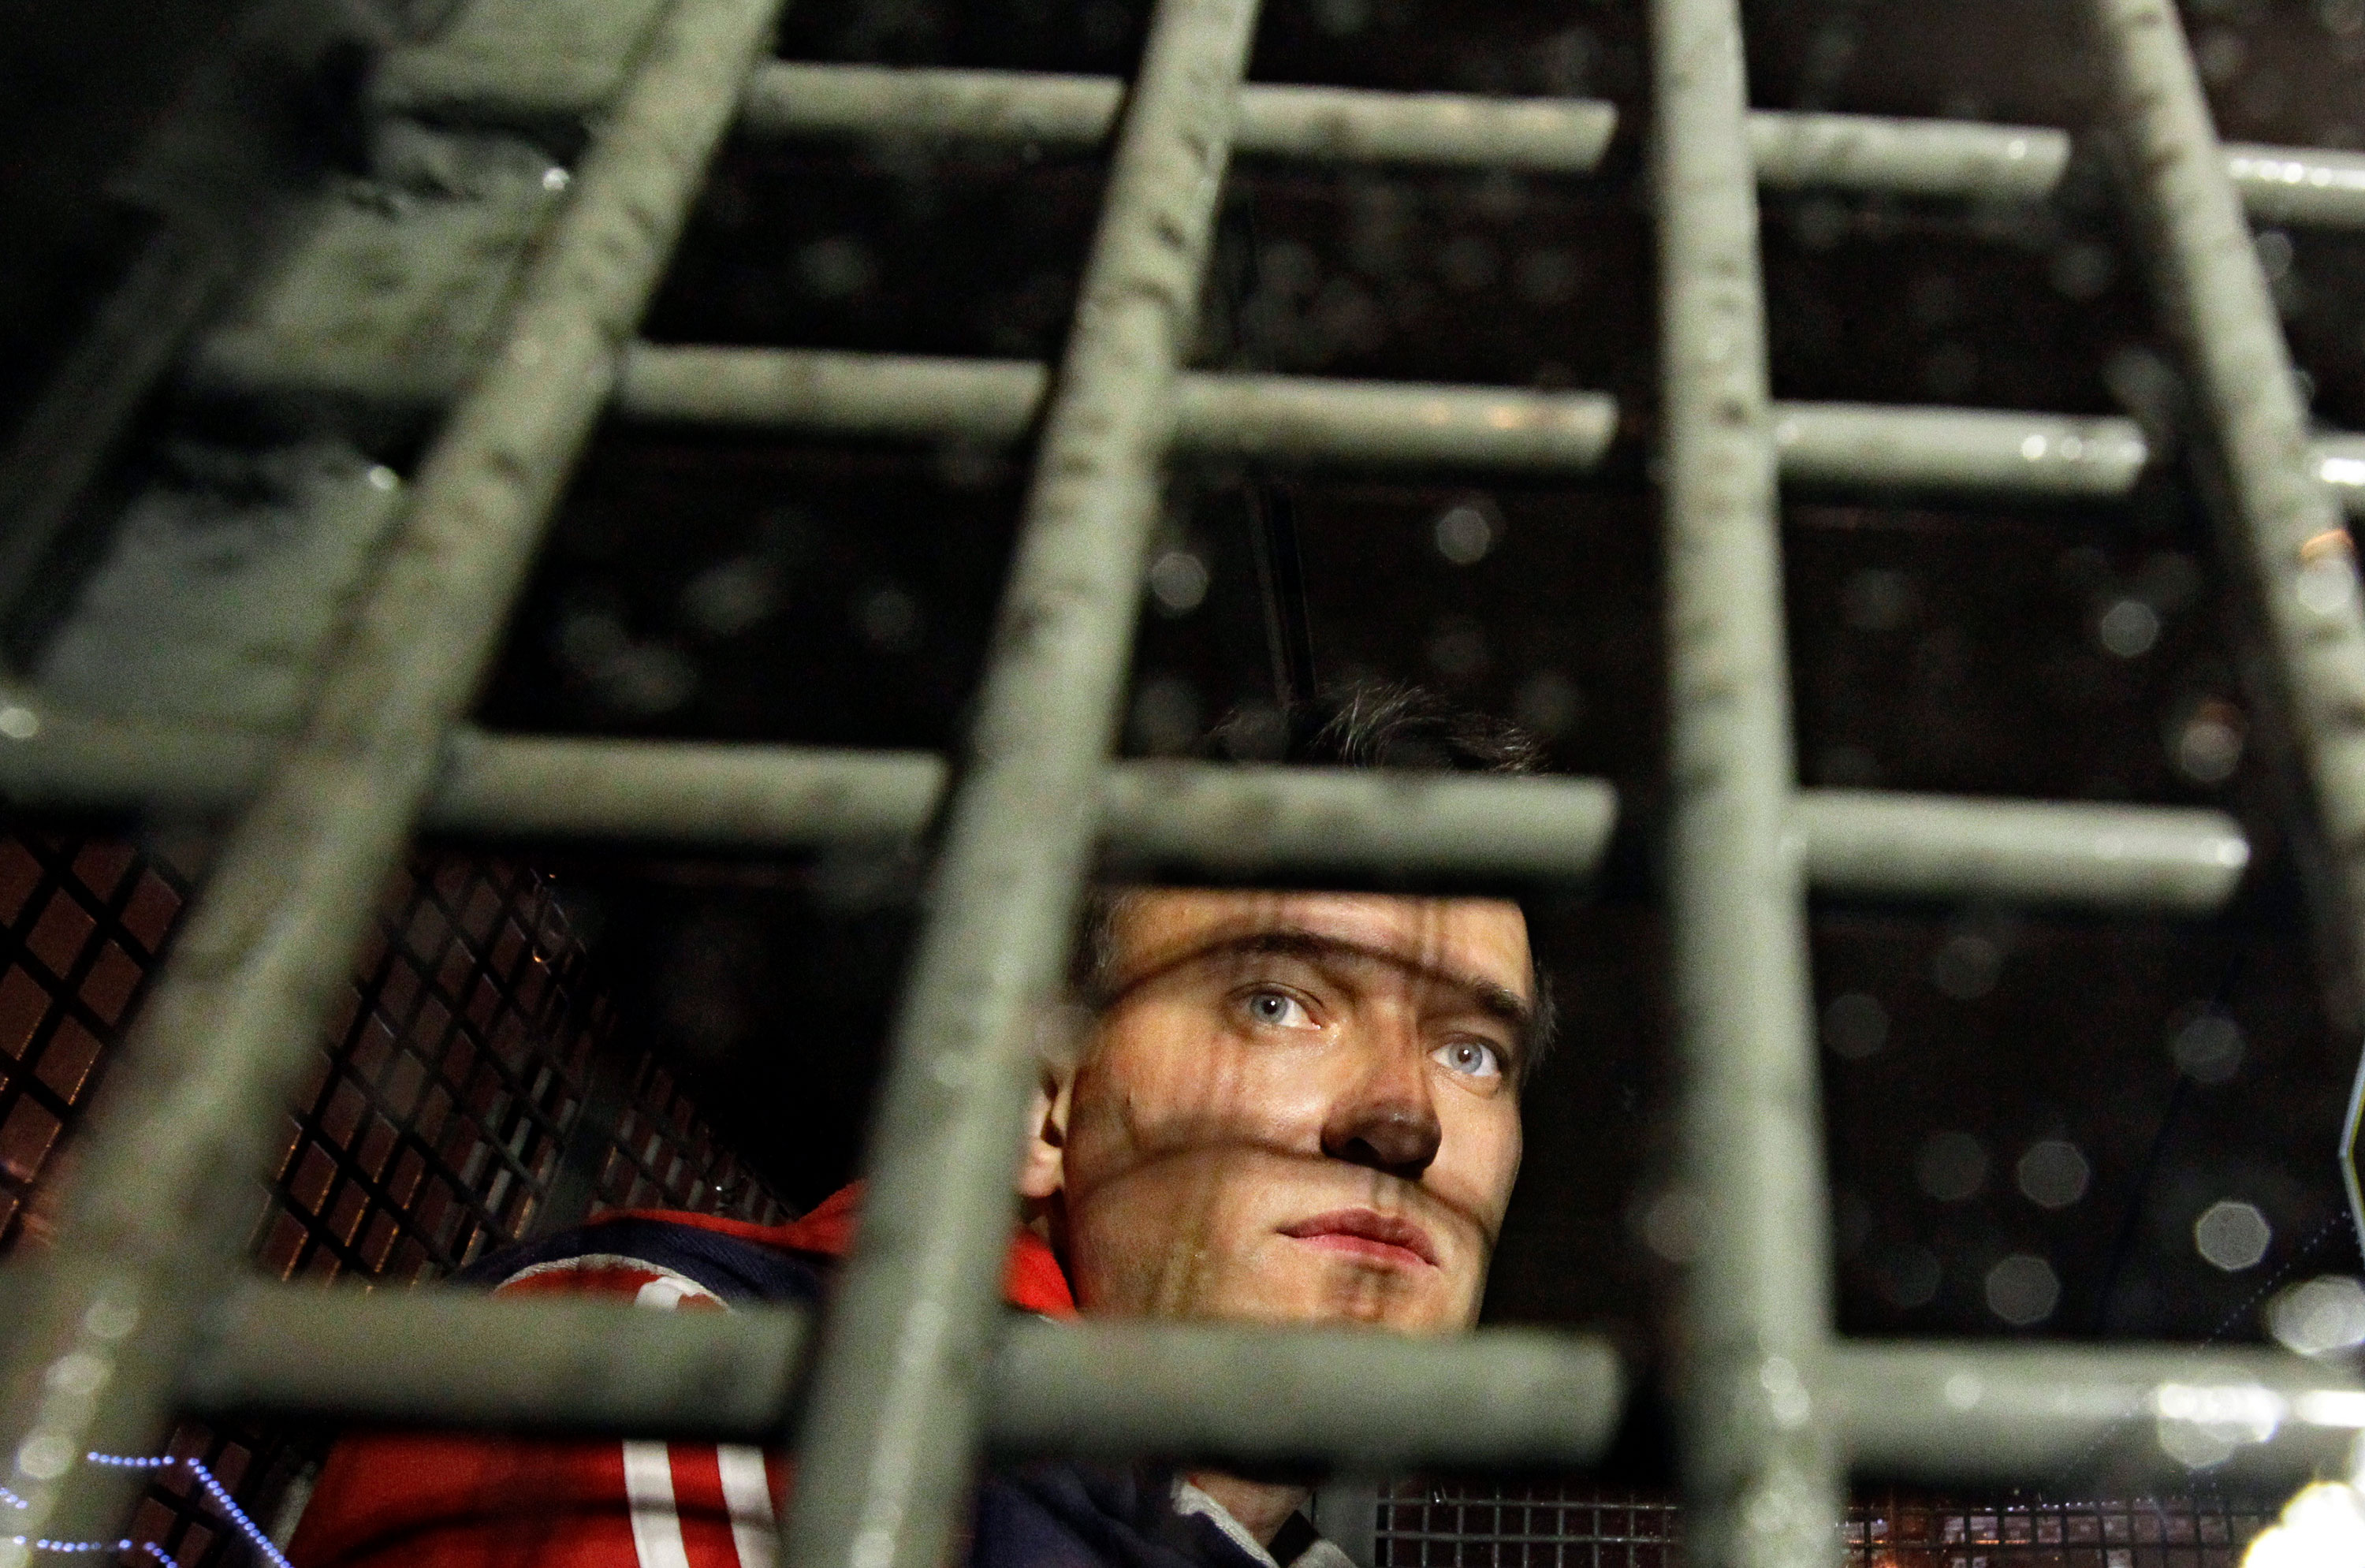 Alexey Navalny is seen behind the bars of a police van after he was detained during protests in Moscow in 2012.